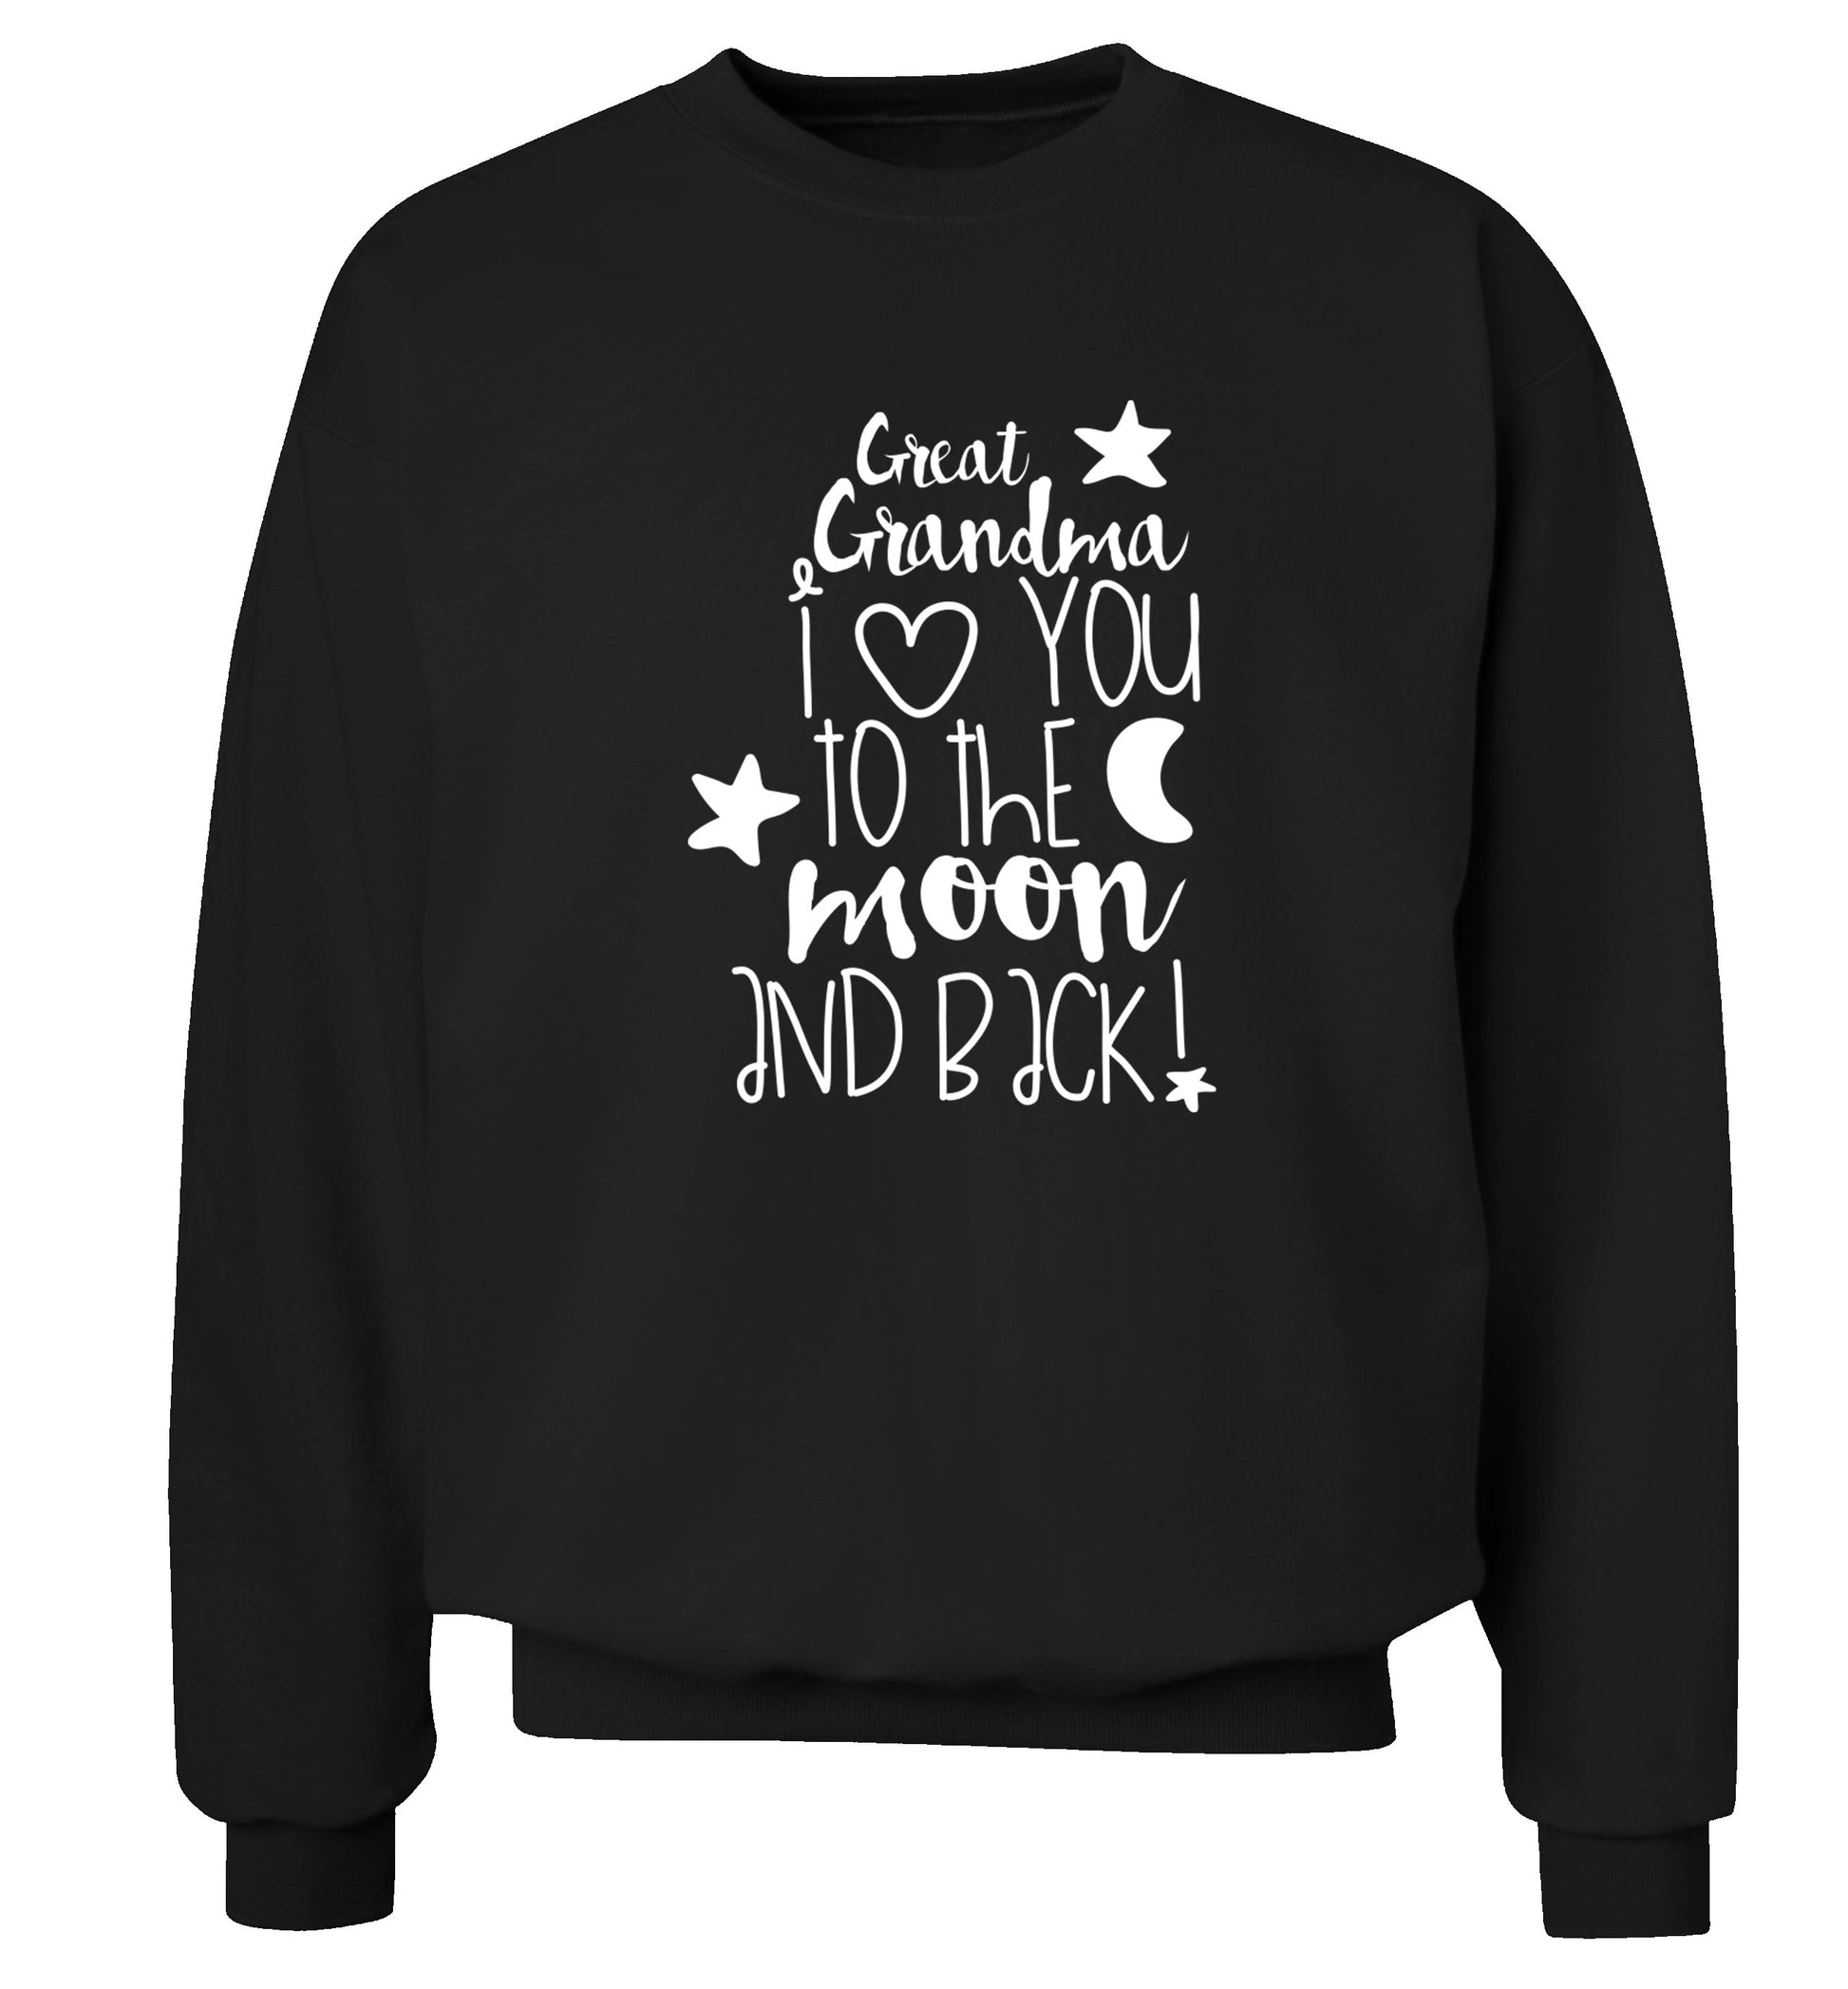 Great Grandma I love you to the moon and back Adult's unisex black  sweater 2XL